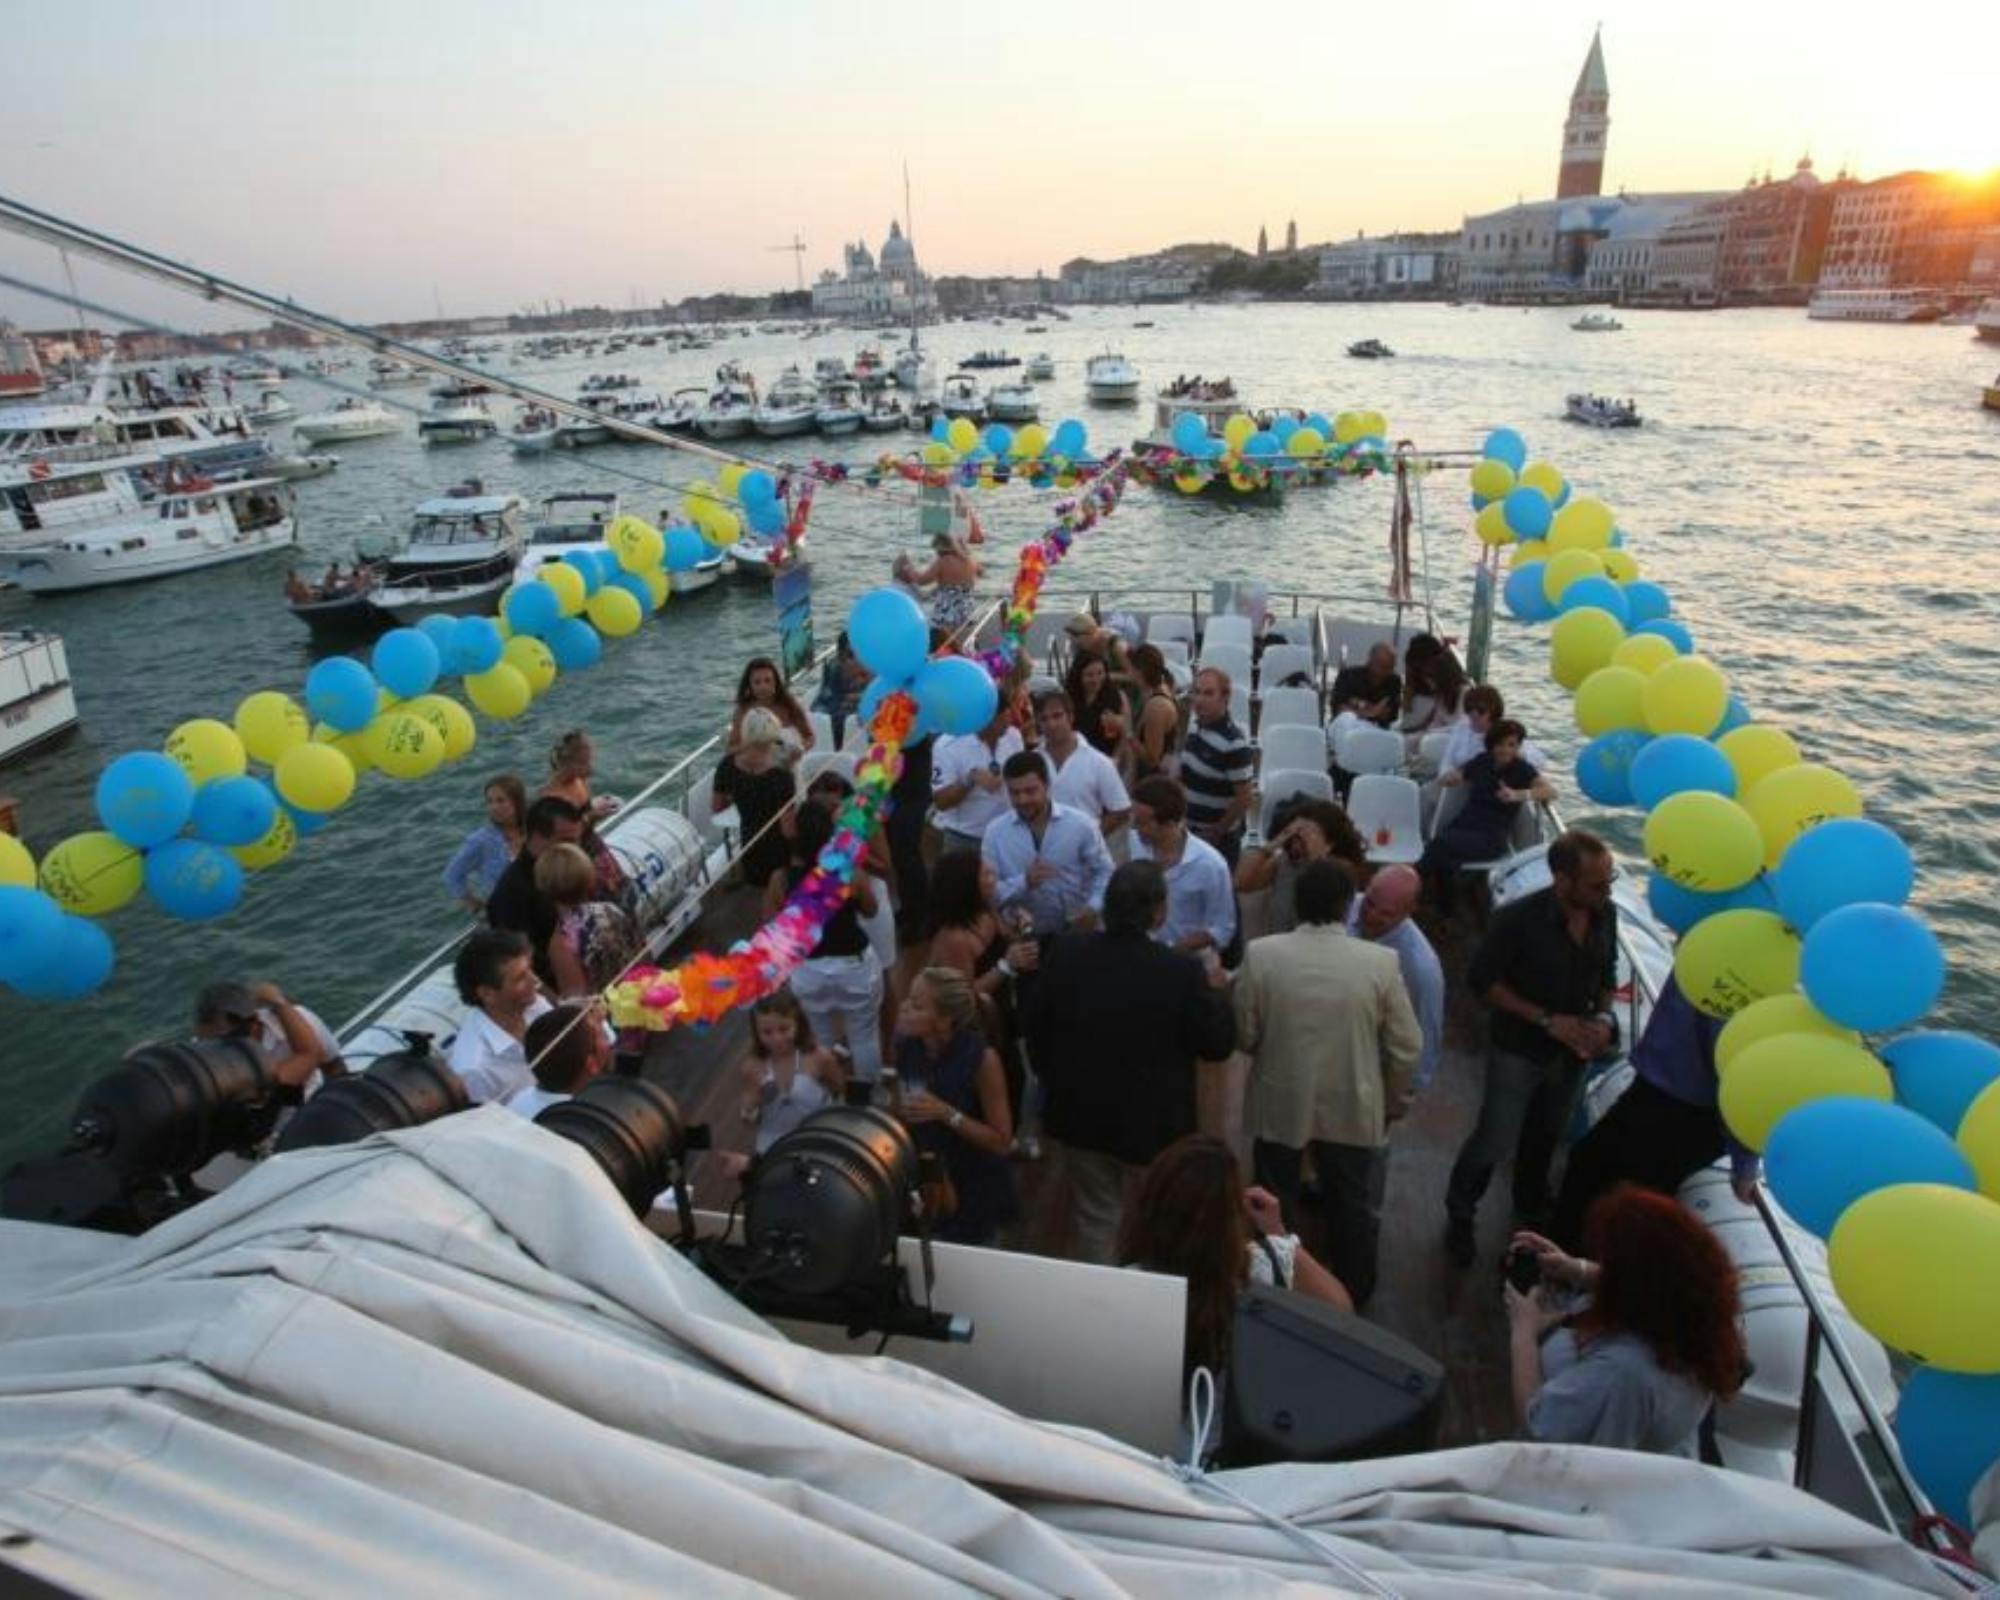 Group of people in a boat with balloons and sea around